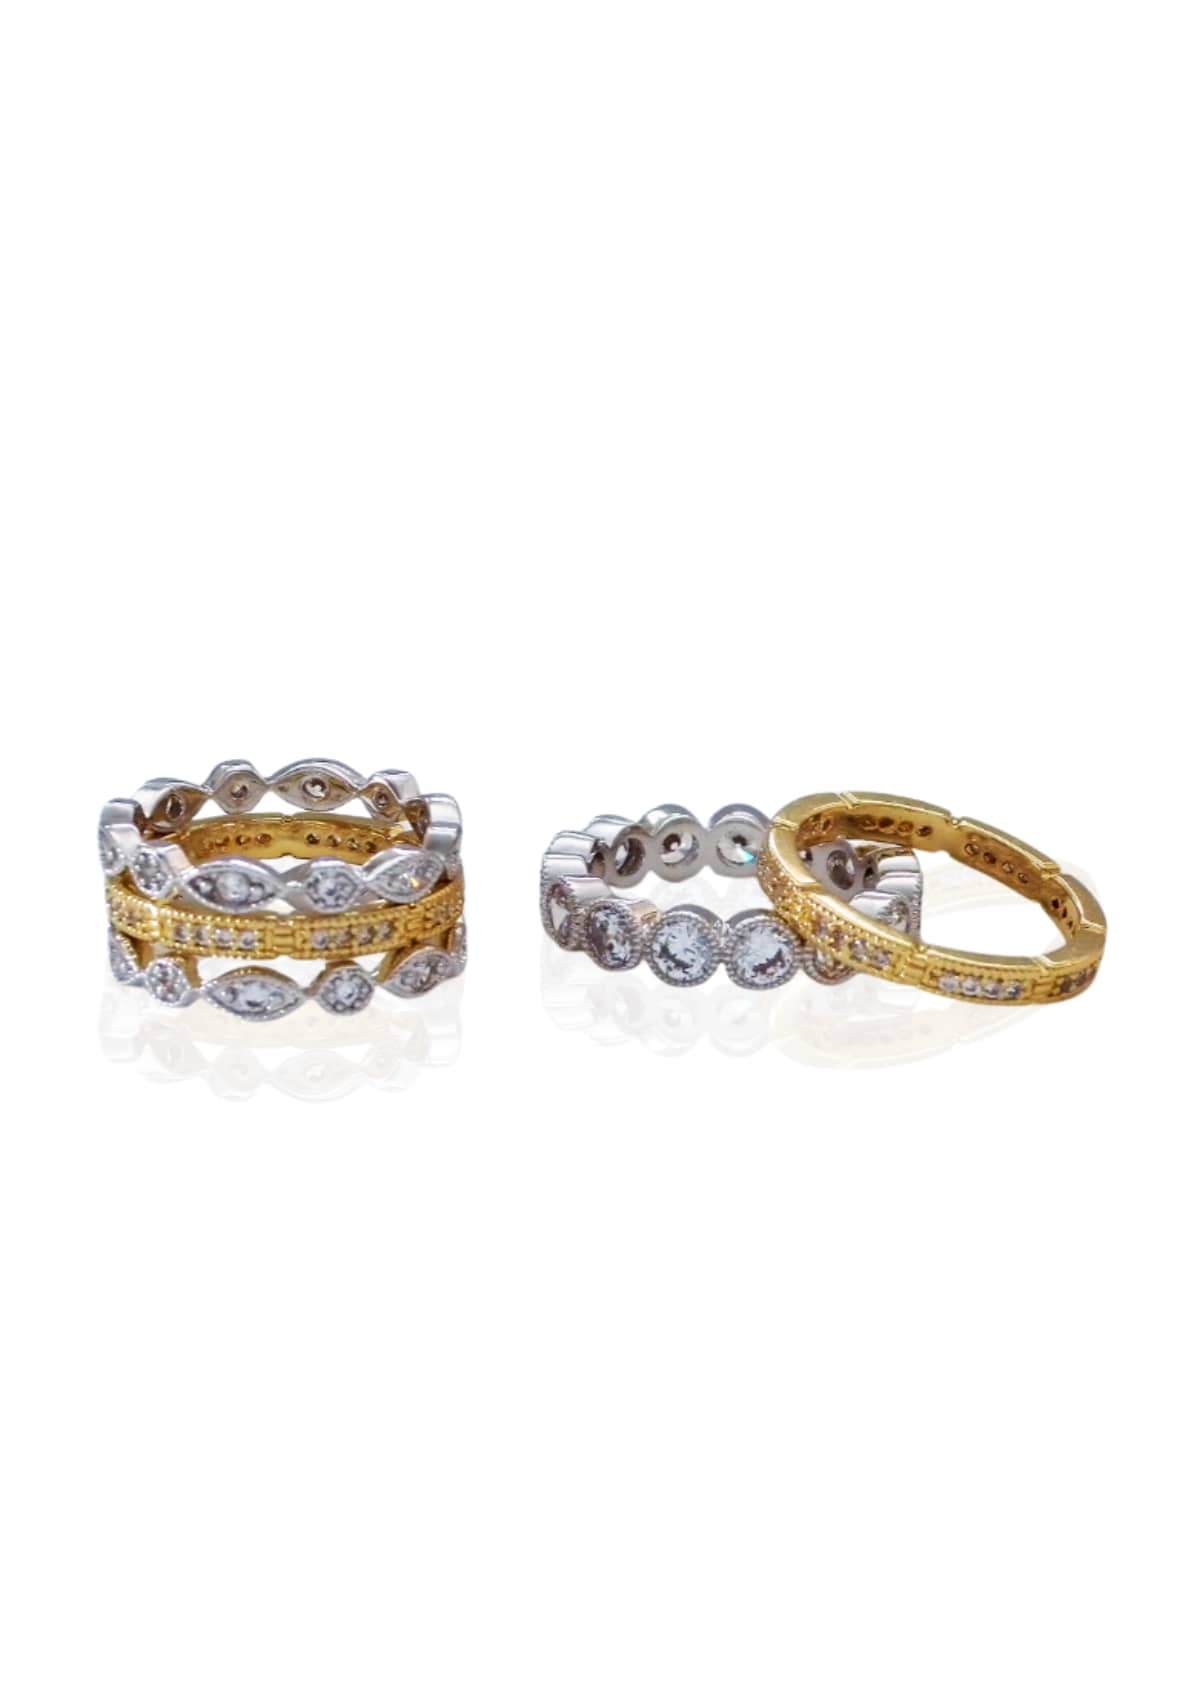 Five Band Stackable with One Large Round CZ Band and 4 Pave Bands -Be-Je Designs- Ruby Jane-